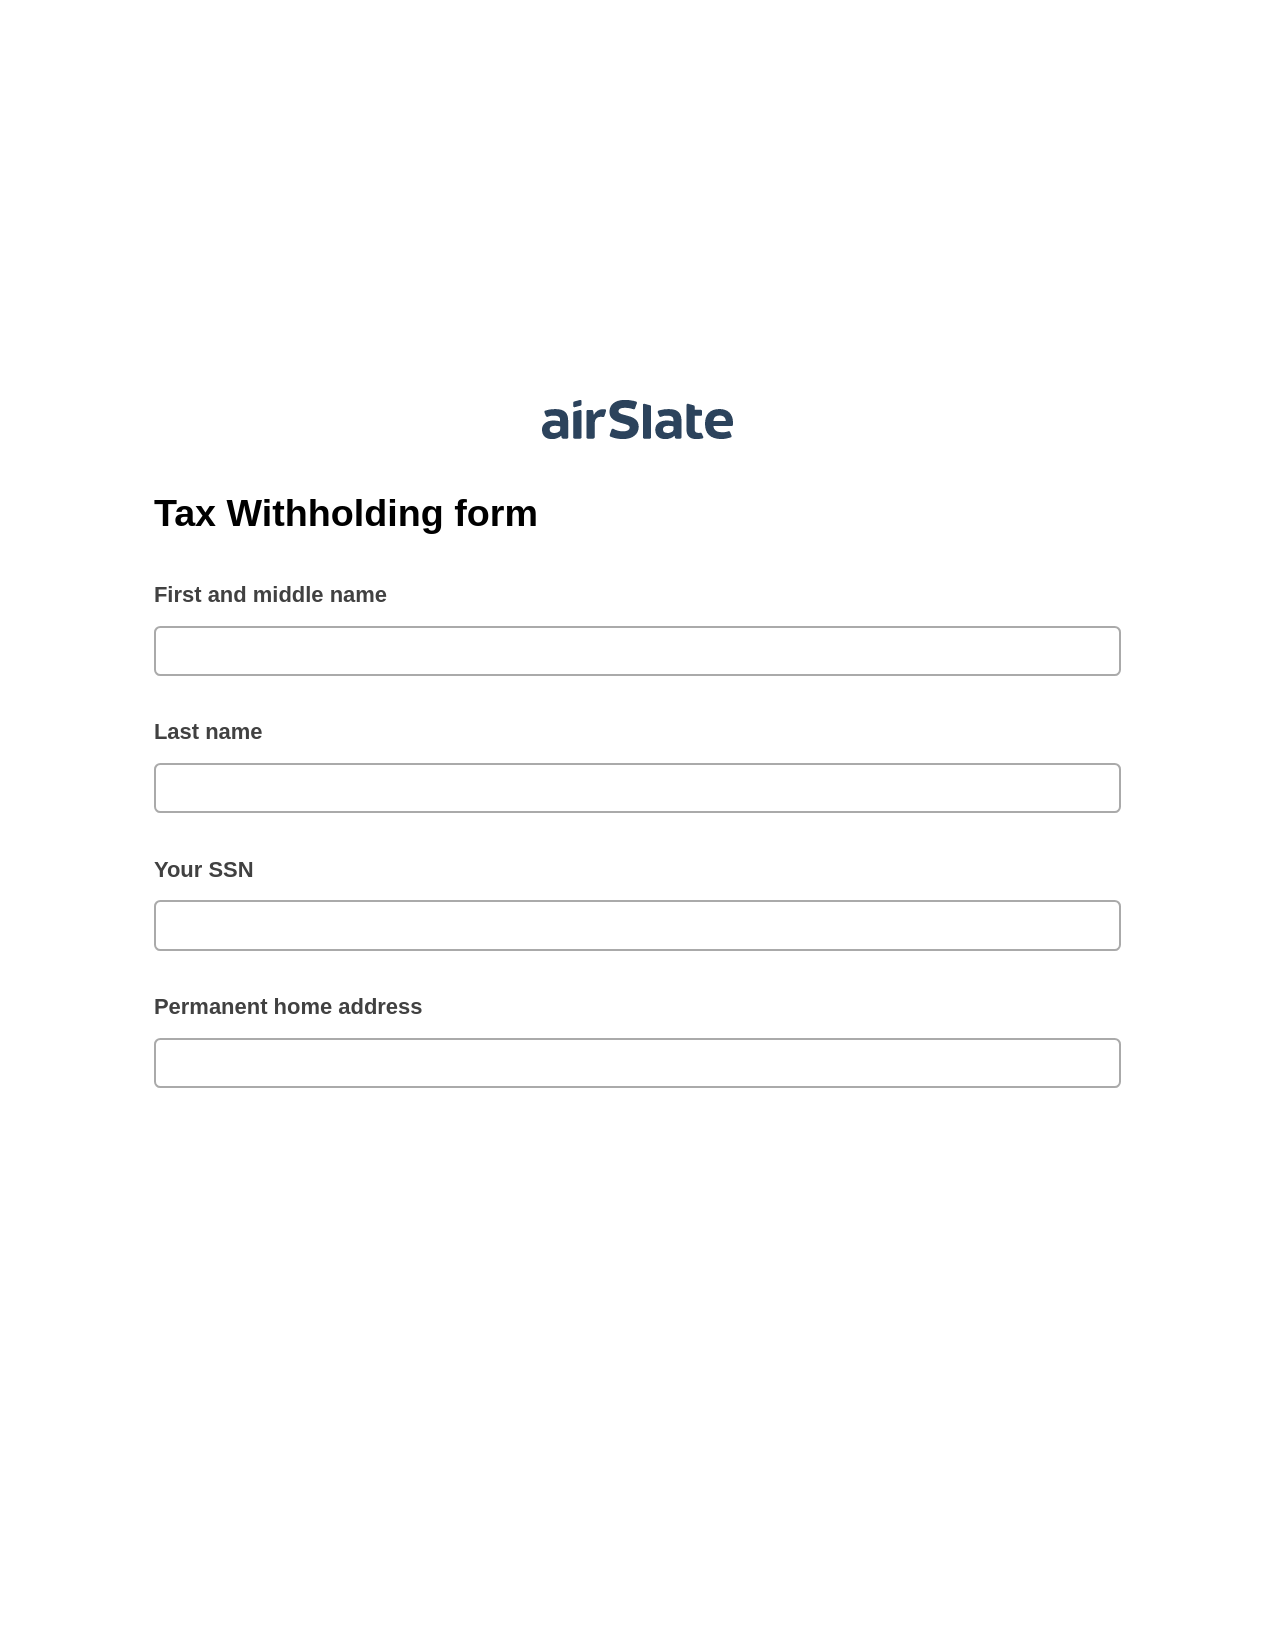 Multirole Tax Withholding form Pre-fill from CSV File Bot, Revoke Access Bot, Box Bot